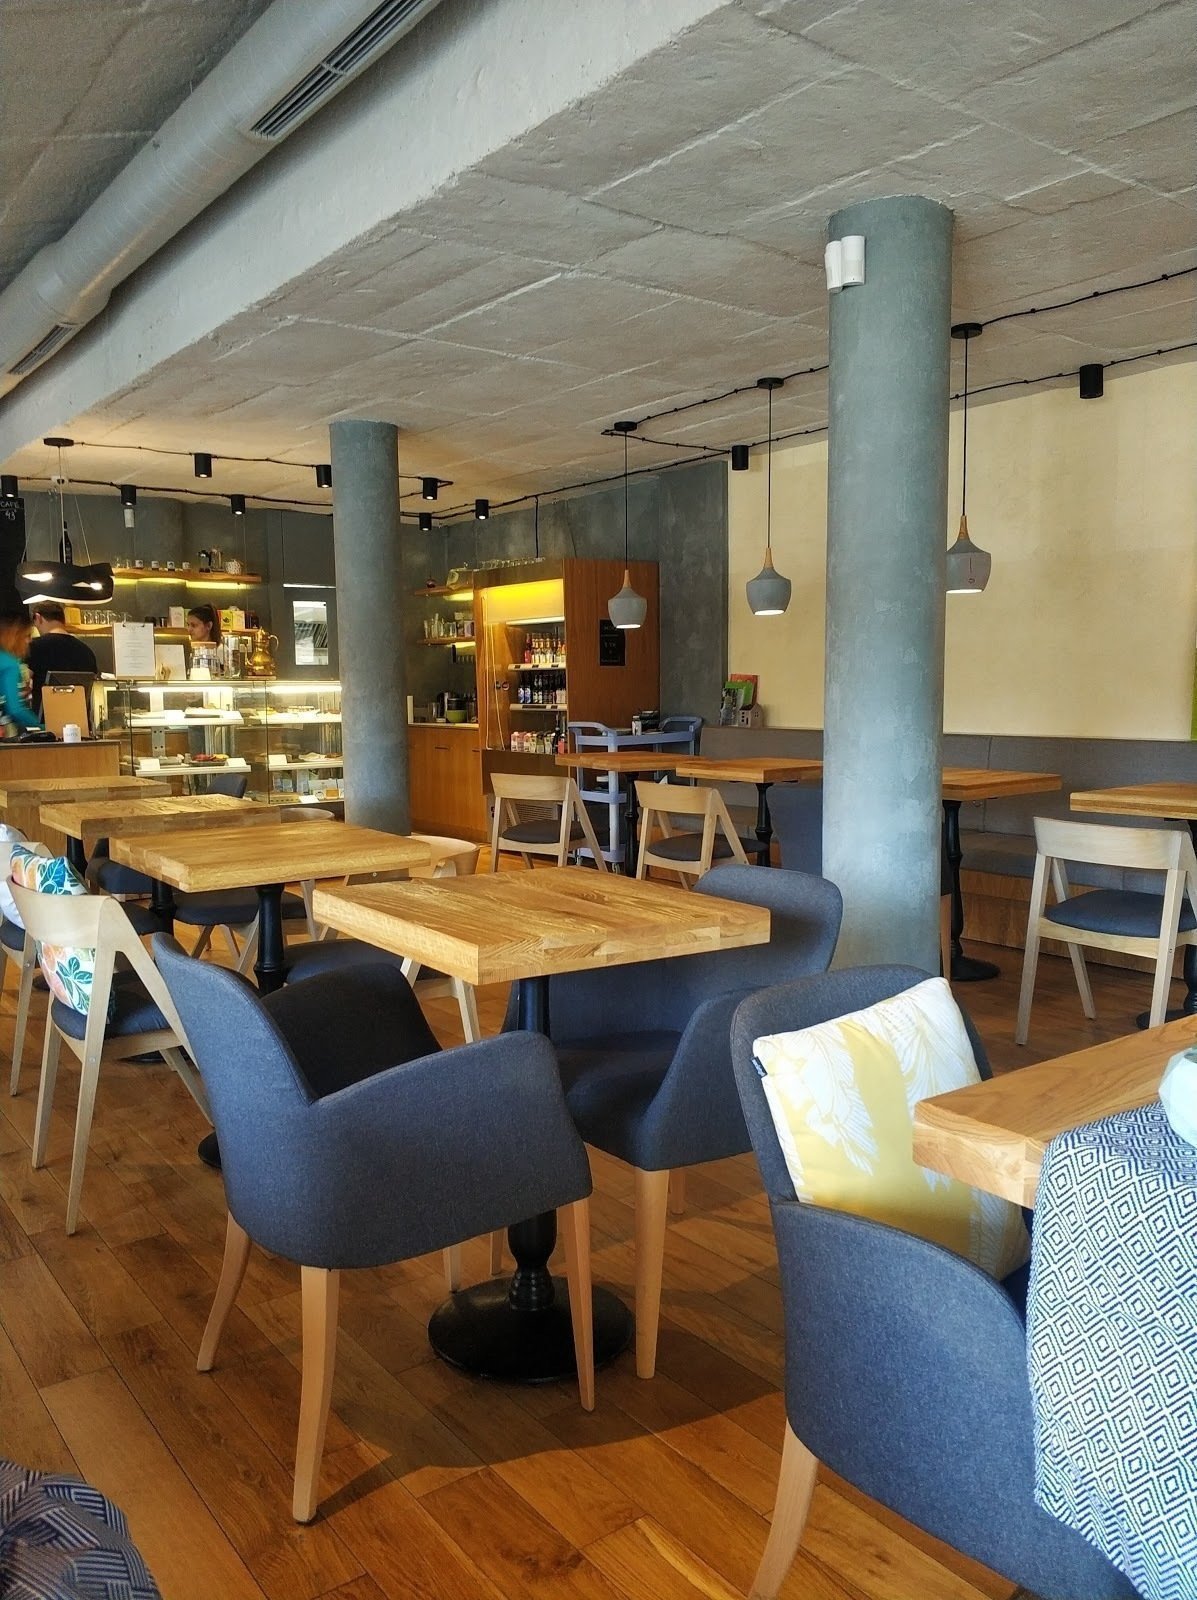 <span class="translation_missing" title="translation missing: en.meta.location_title, location_name: Café Parallel 43°, city: Sofia">Location Title</span>